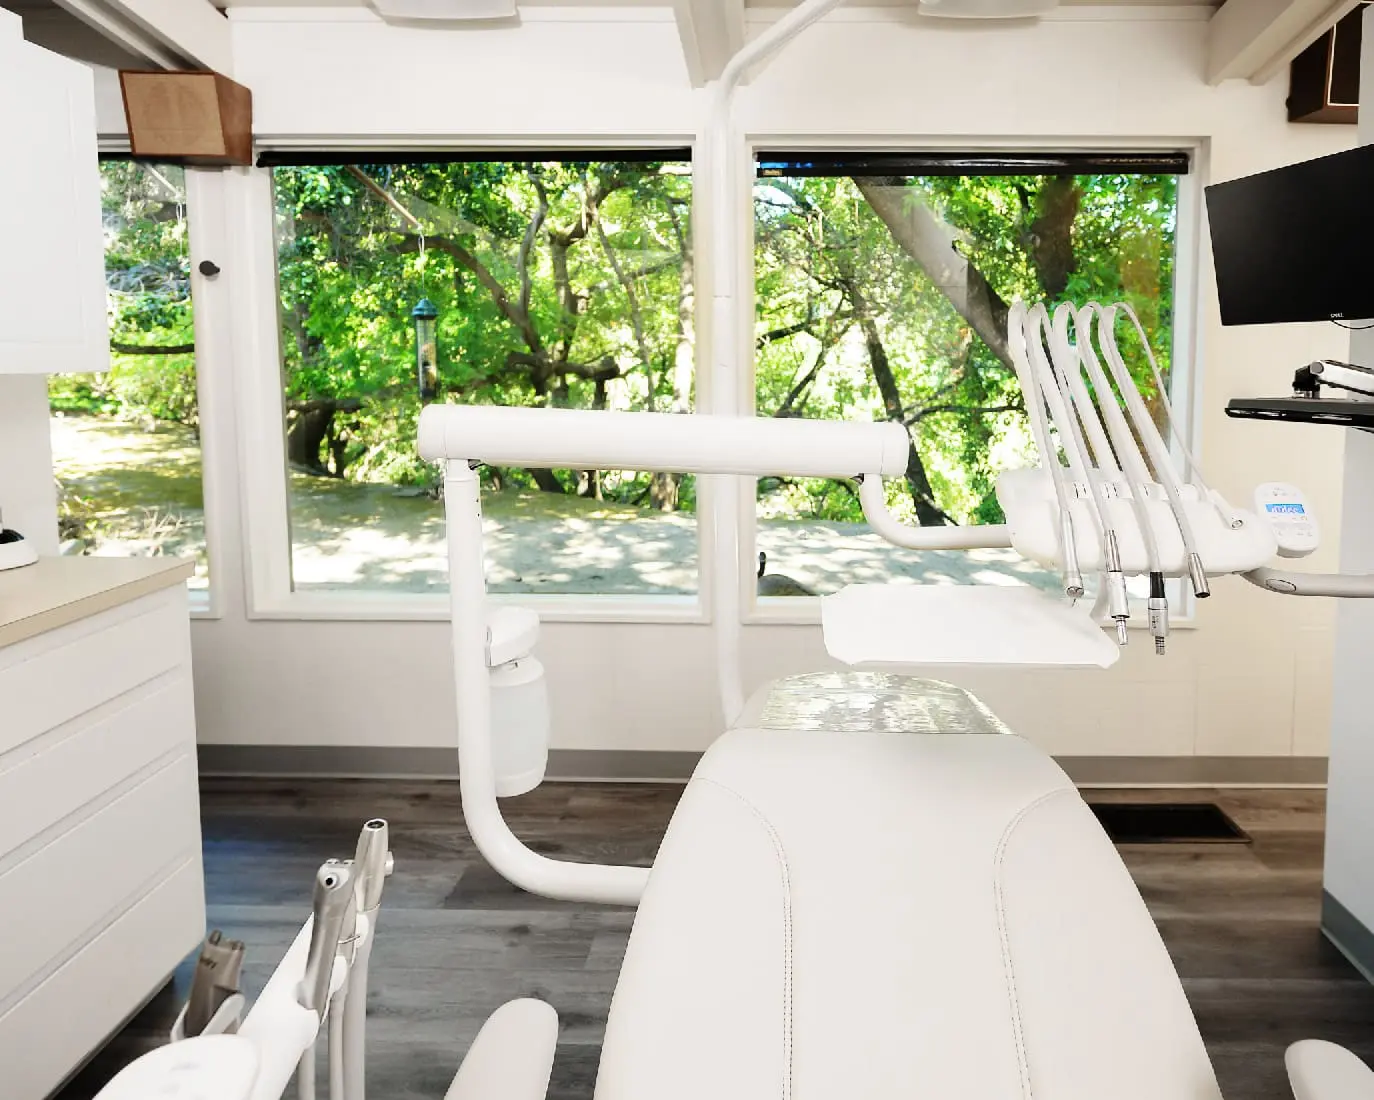 Patients have a sunlight-filled view of nature from the dental chair at Walnut Creek Dental Studio